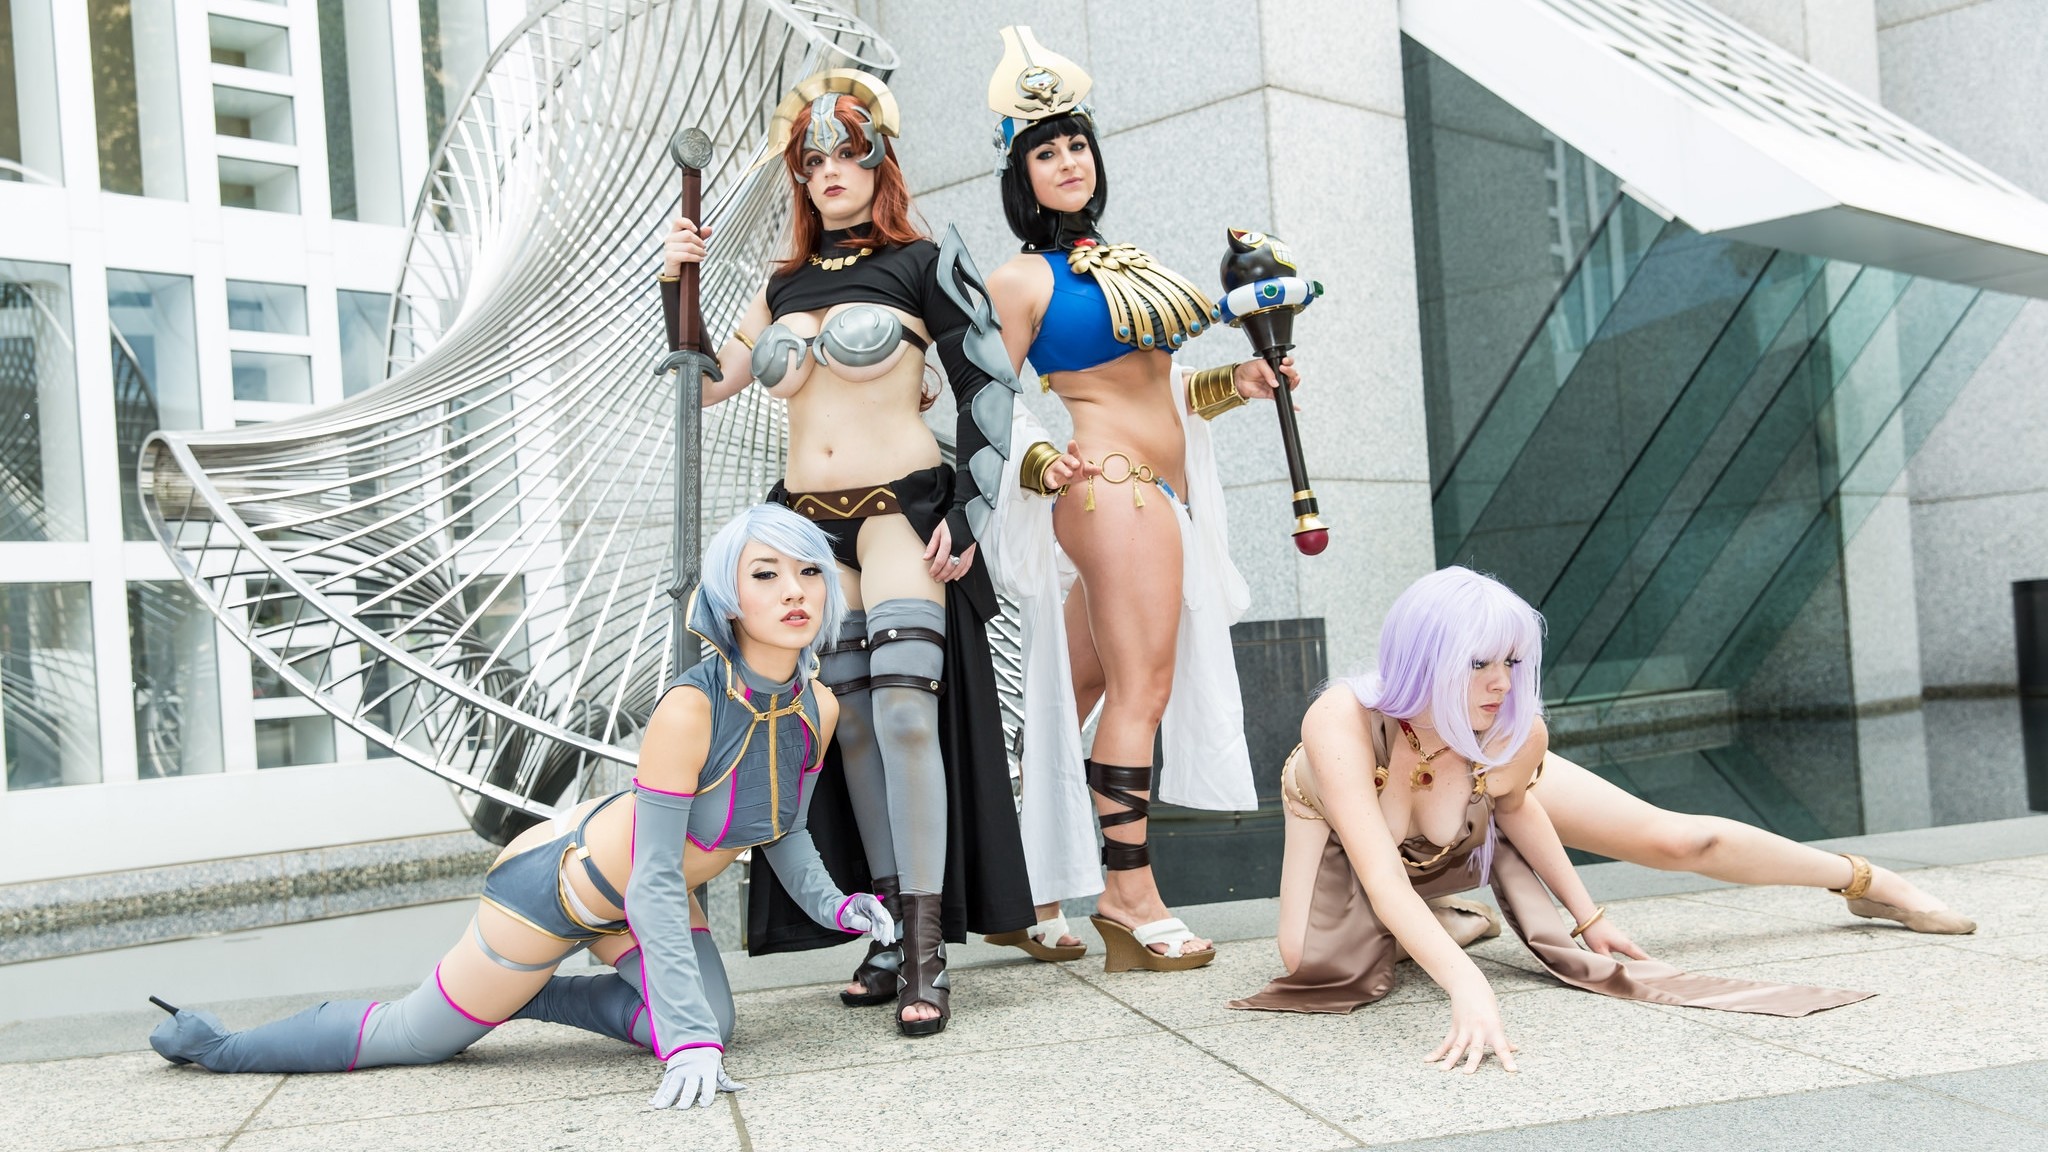 2048x1152 Wallpaper of Irma, Claudette, Menace & Annelotte cosplay from...